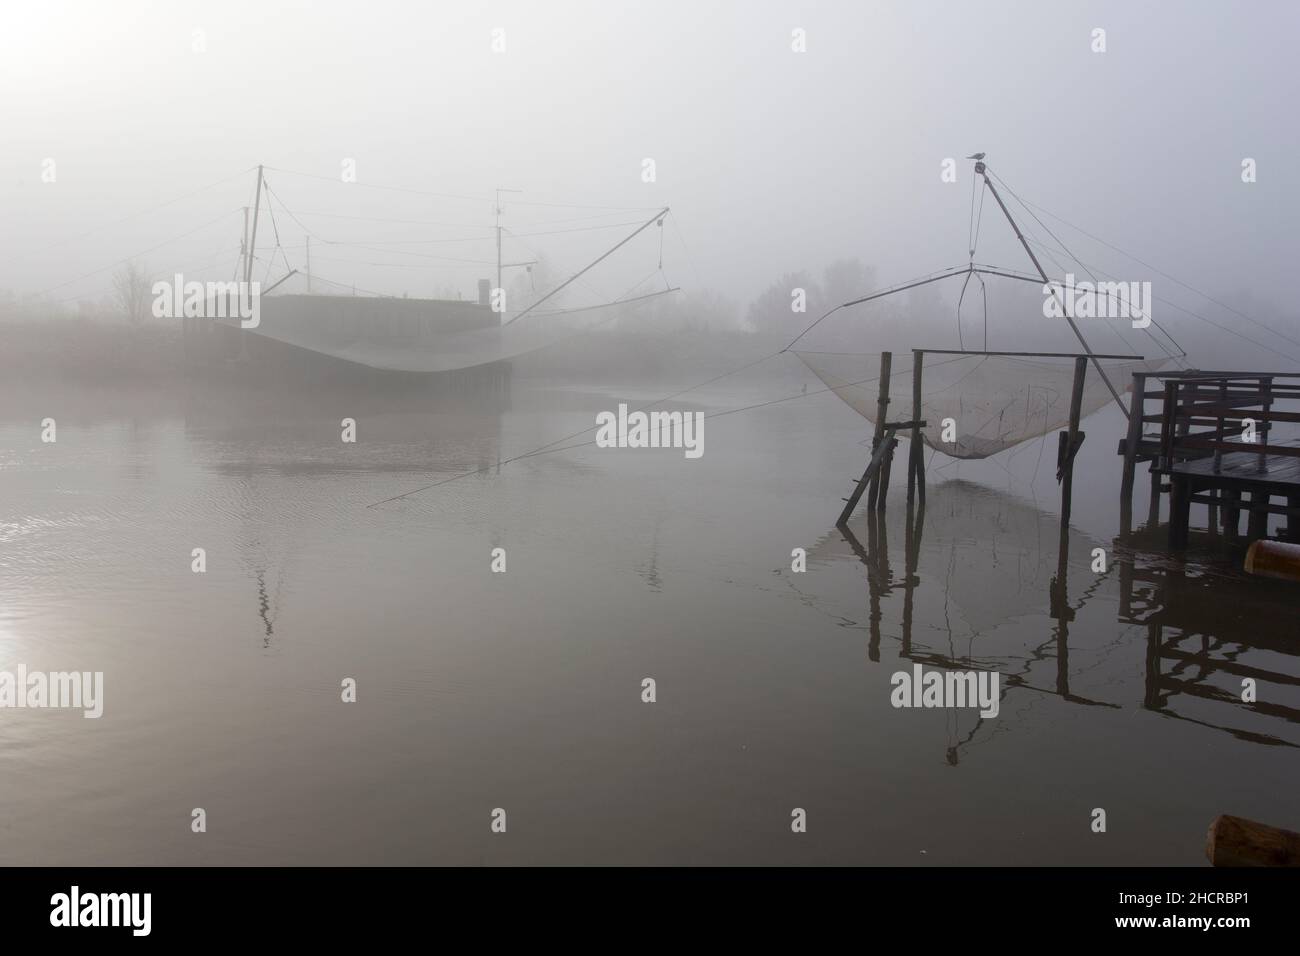 Comacchio, Italy - December 29, 2019: view of fishing house in foggy day Stock Photo